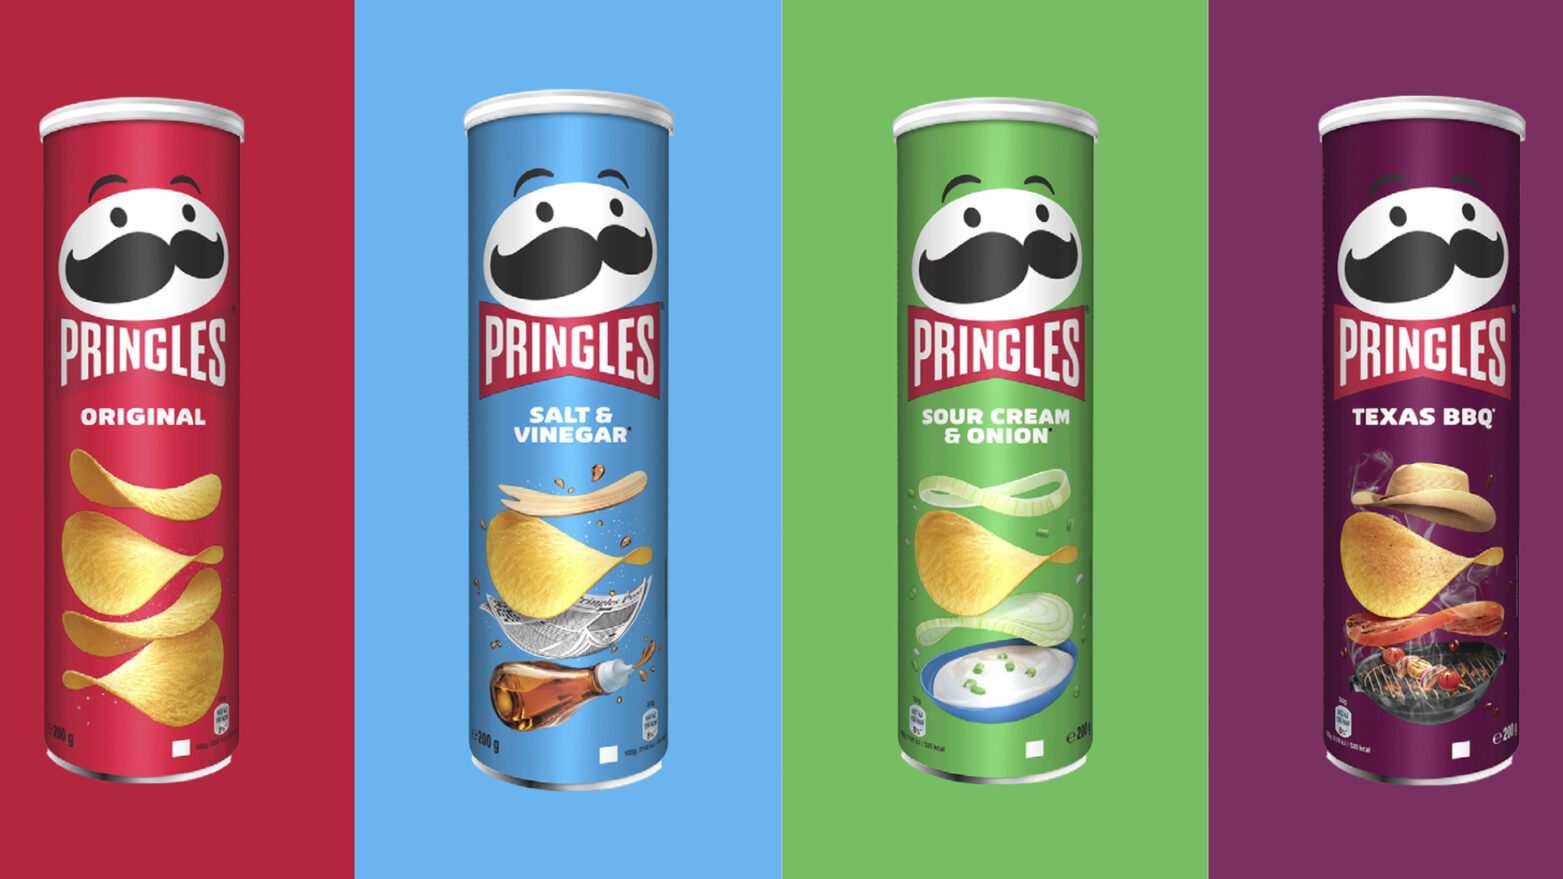 Pringles is the American brand of potato-based chips by Kellogg's